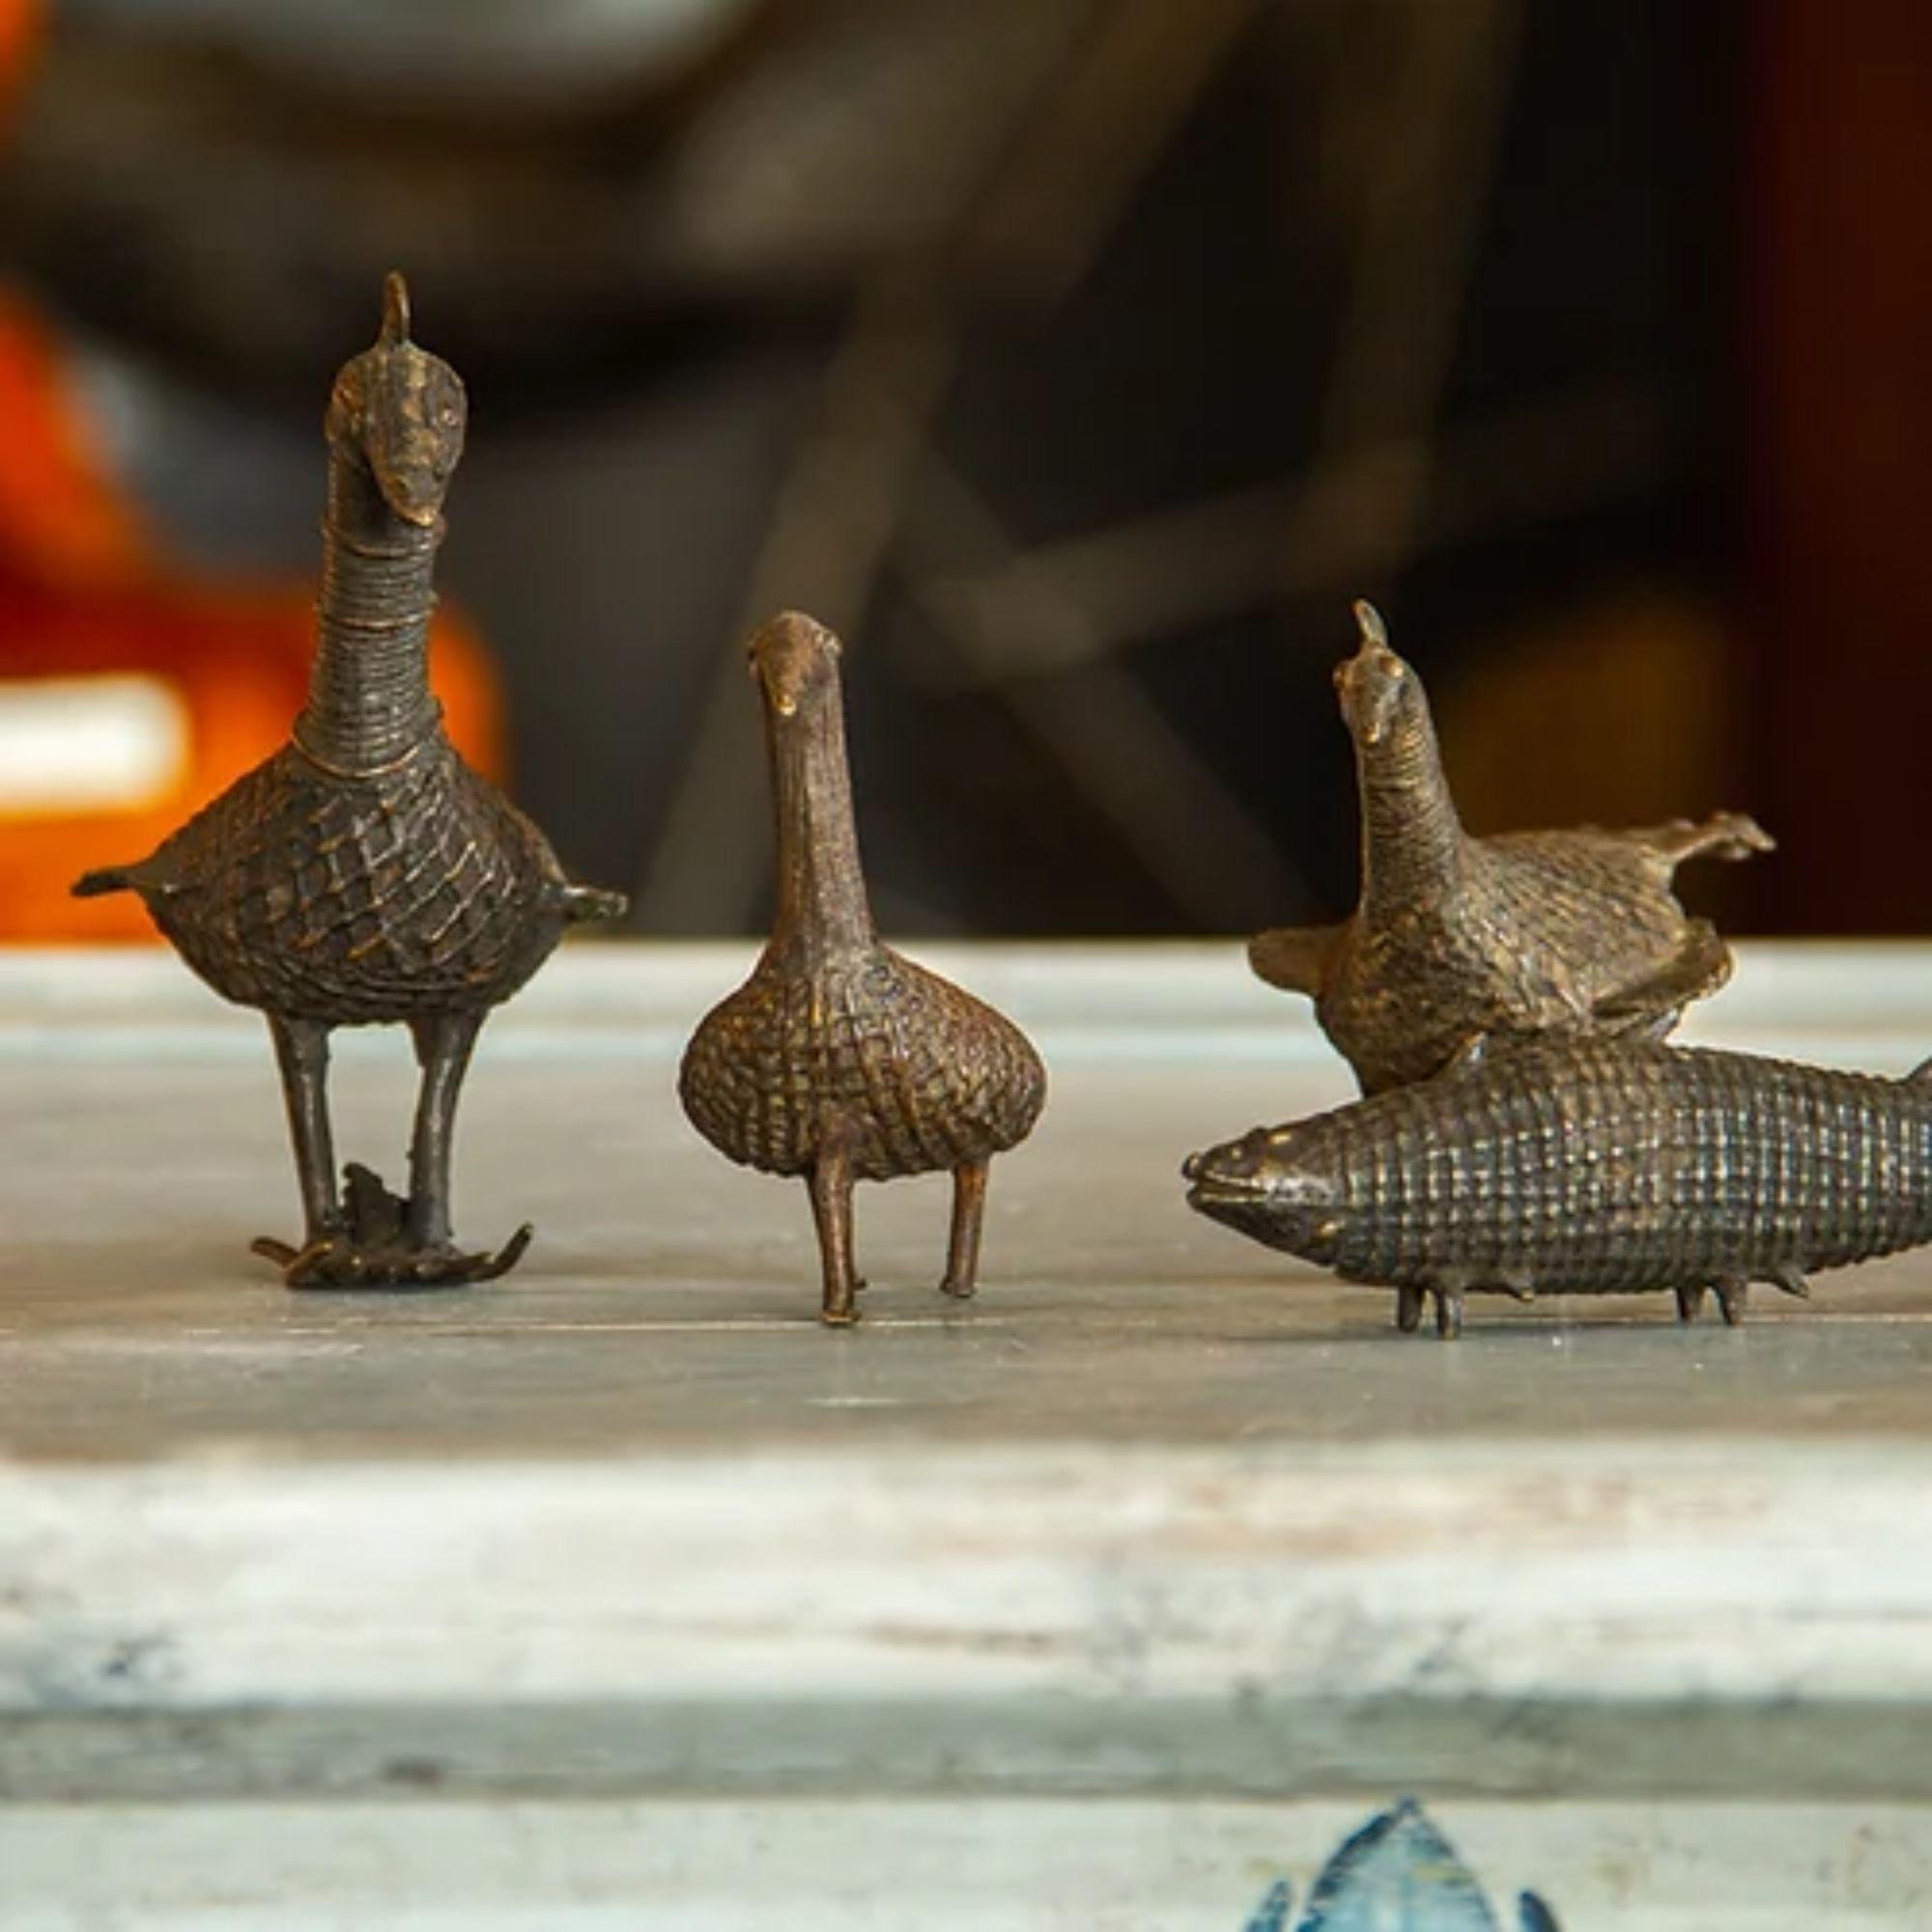 Charming set of four small simply carved bronze animals comprising of two peacocks, llama and a fish.

Additional Information:
Material: Bronze, Glass
Dimensions: 12 D x 7 W x 12 H cm